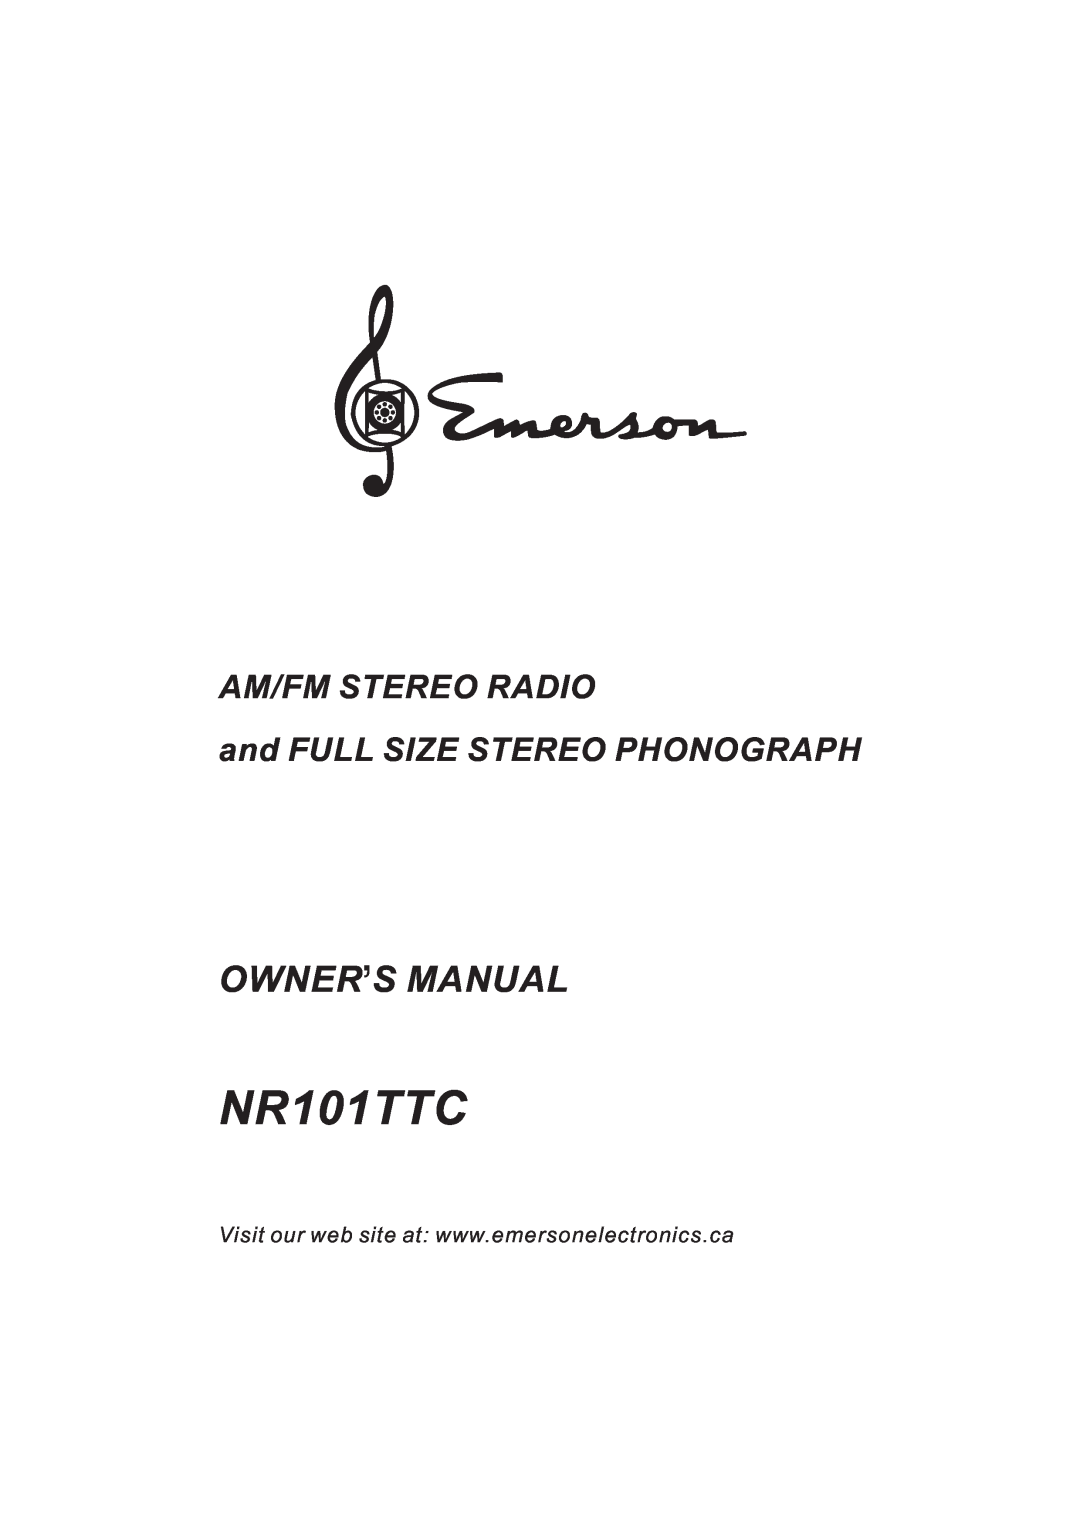 Emerson NR101TTC owner manual Owner,S Manual, Am/Fm Stereo Radio, and FULL SIZE STEREO PHONOGRAPH 